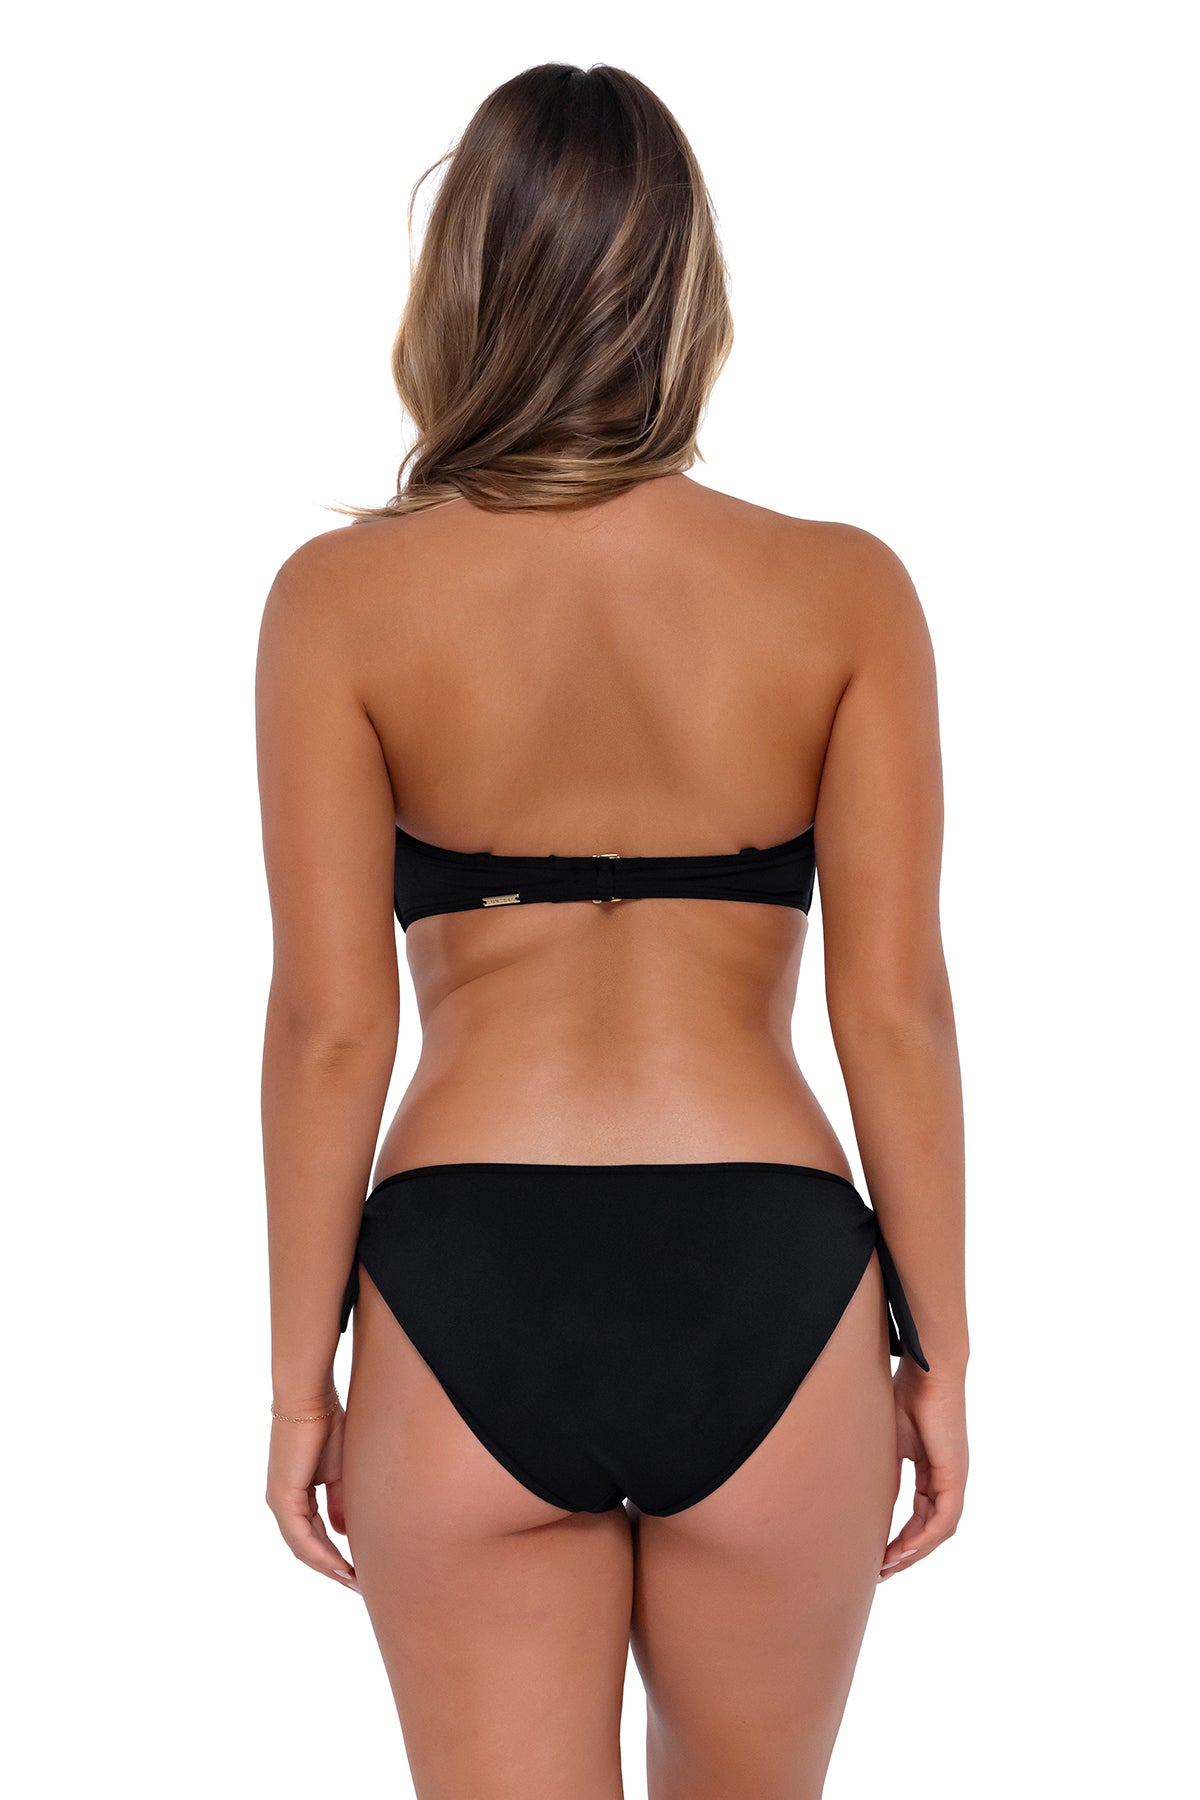 Back pose #1 of Taylor wearing Sunsets Black Lula Reversible Hipster Bottom with side ties and matching Iconic Twist Bandeau worn as a strapless bikini